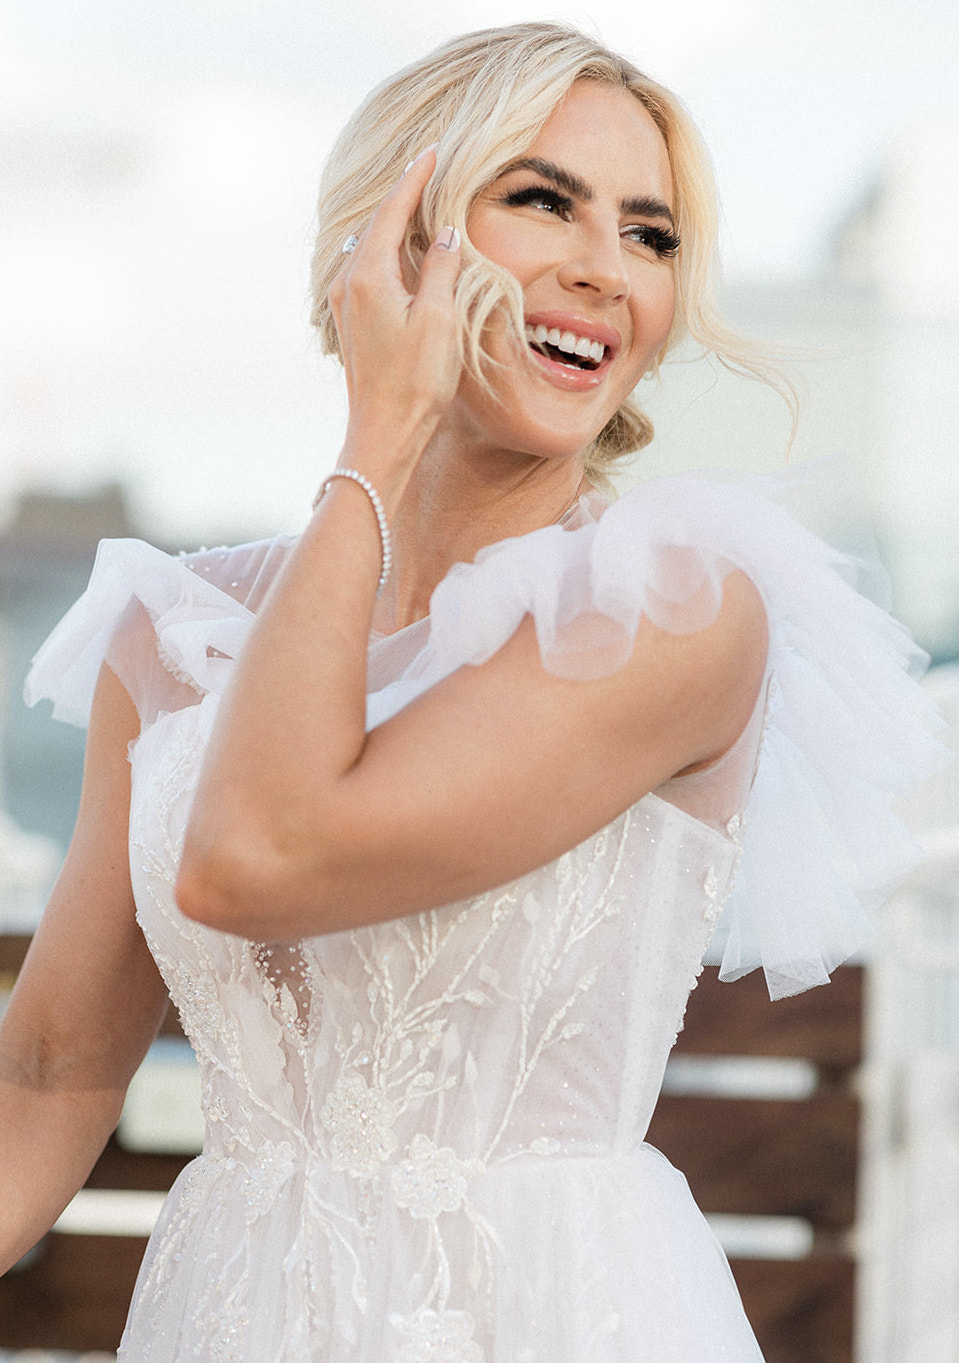 The bride looks to the sky laughing, while wearing a wedding gown with flowers and tulle detailing.